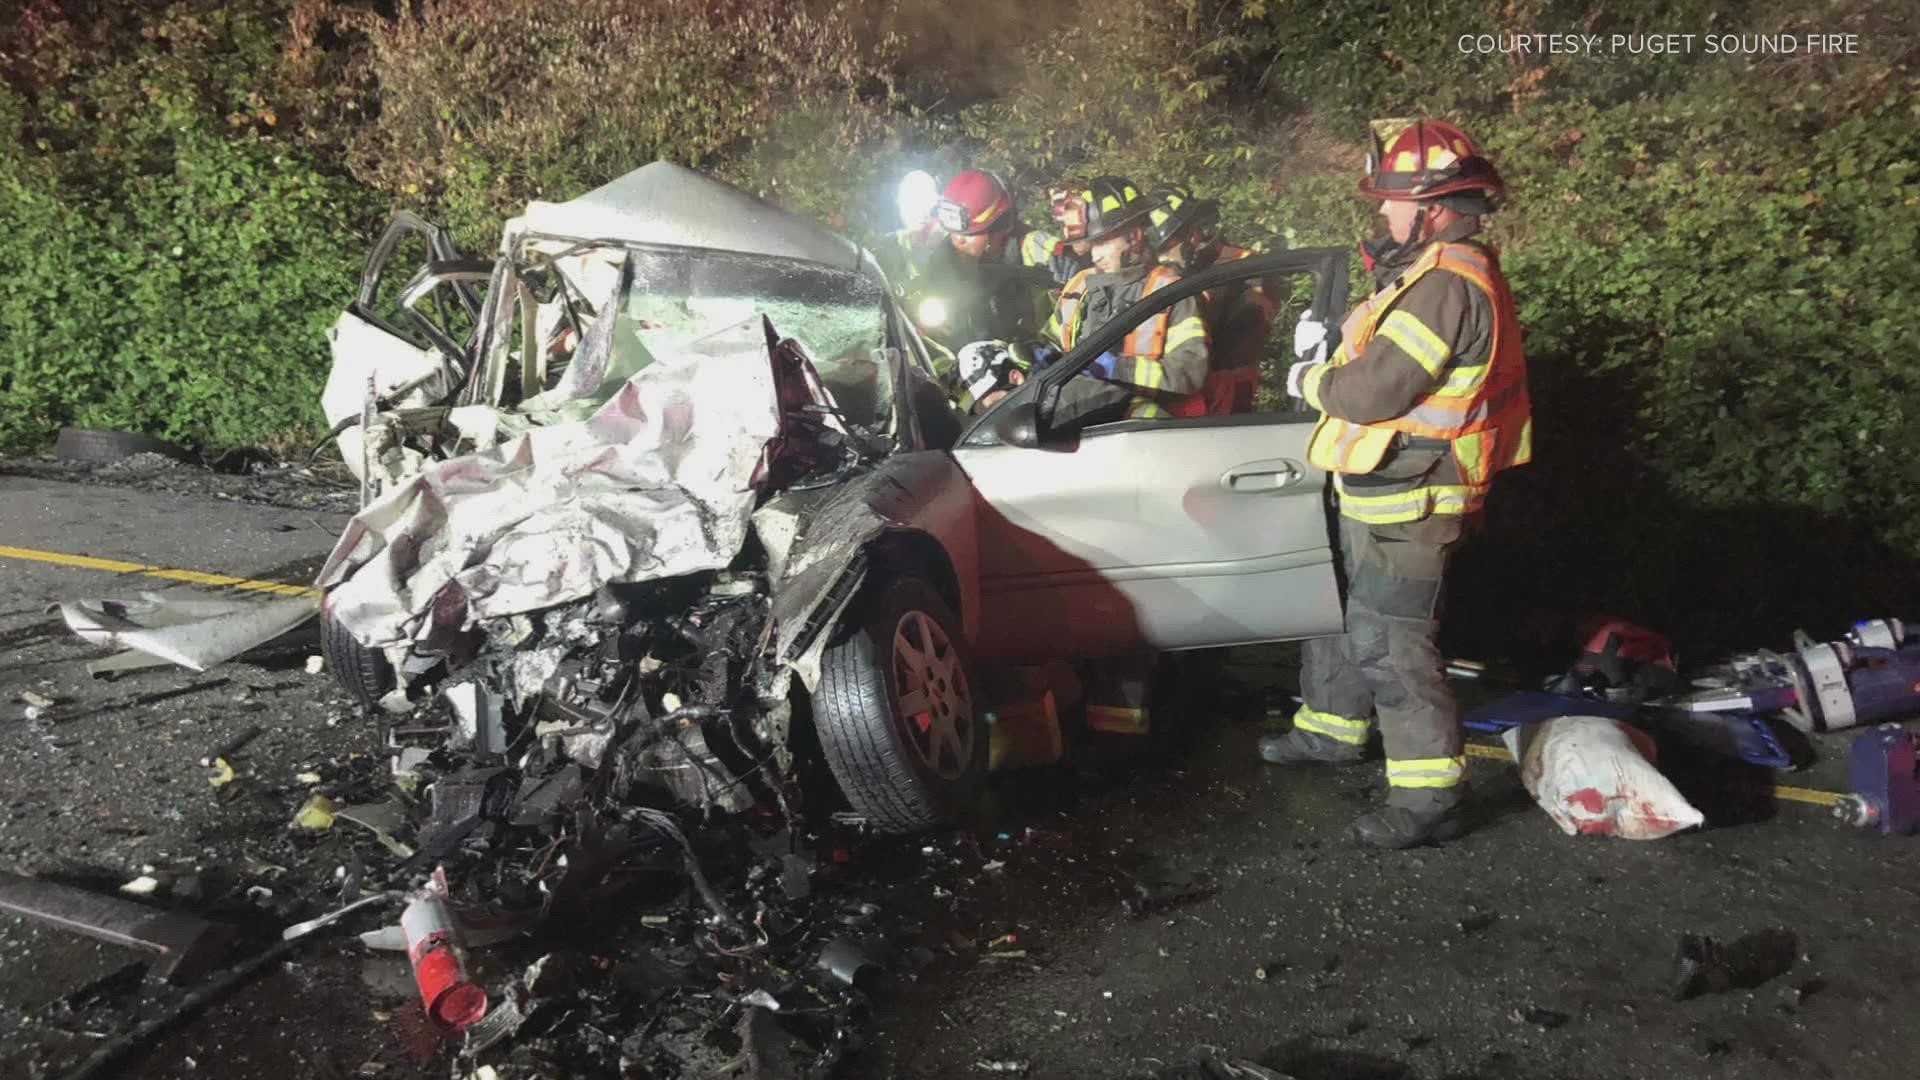 The Washington State Patrol said the teen's car was fully engulfed in flames within minutes.